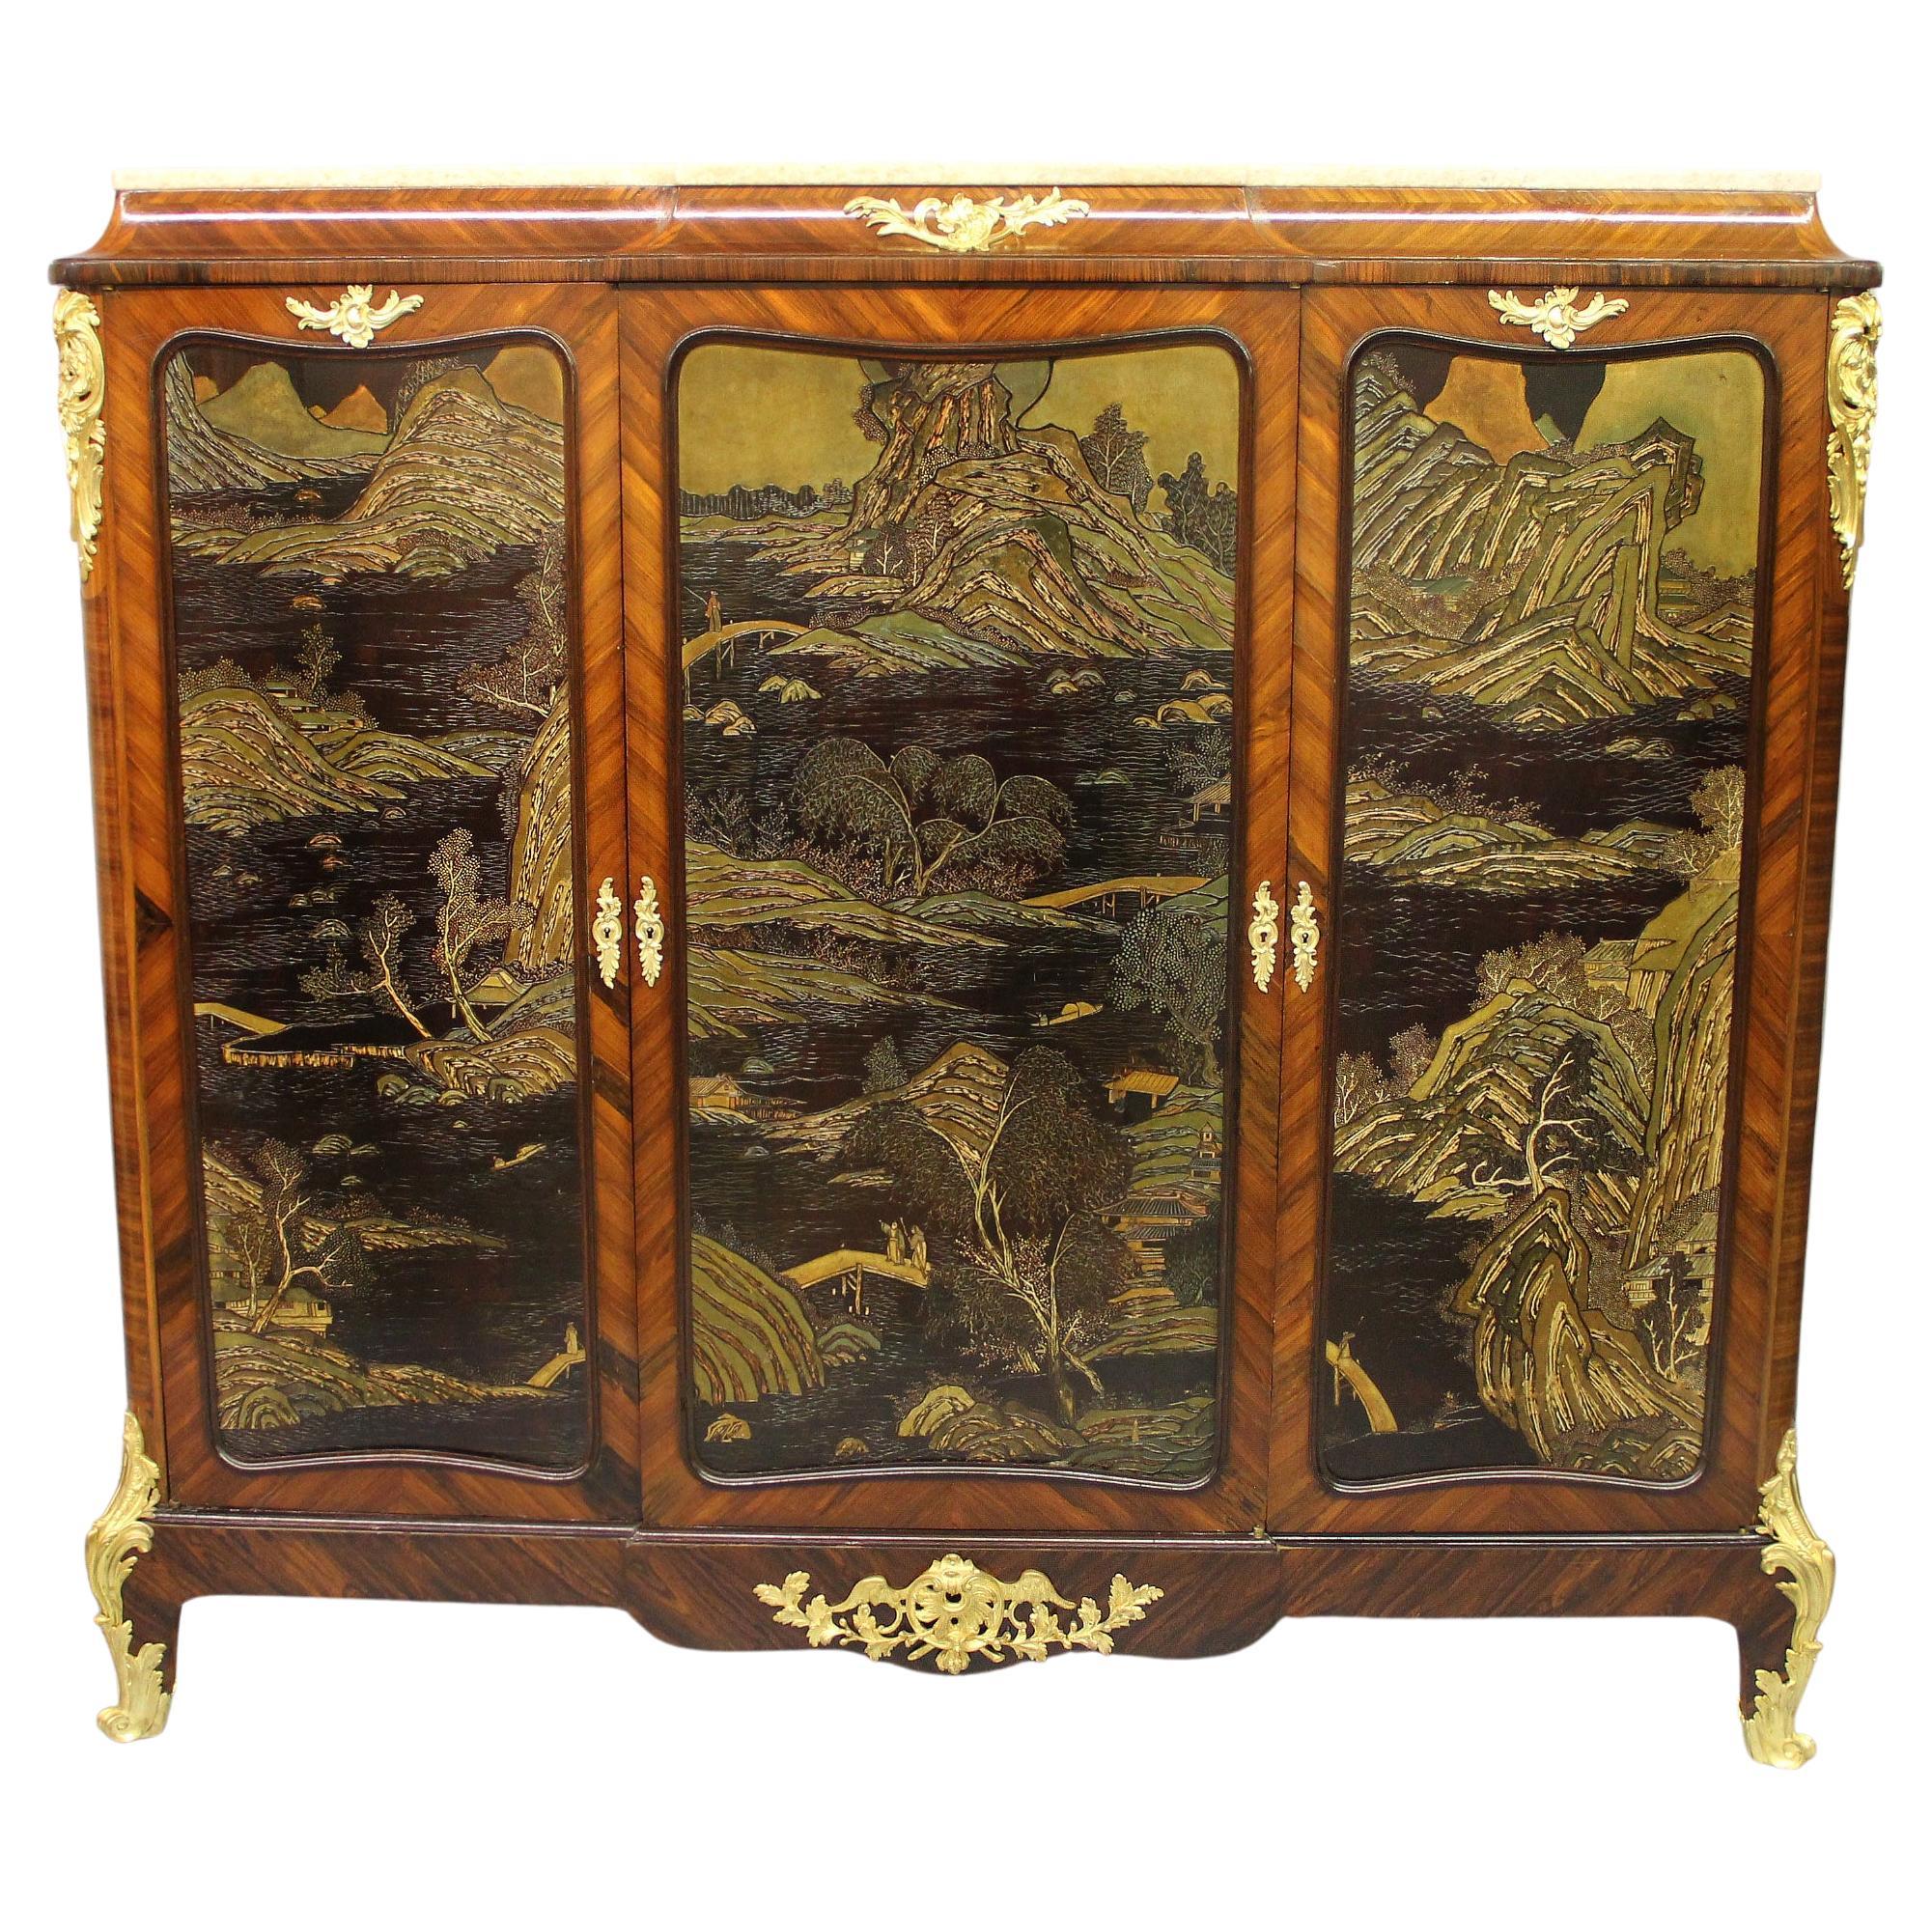 Interesting 19th Century Gilt Bronze Mounted Chinoiserie Cabinet by L. Bontemps